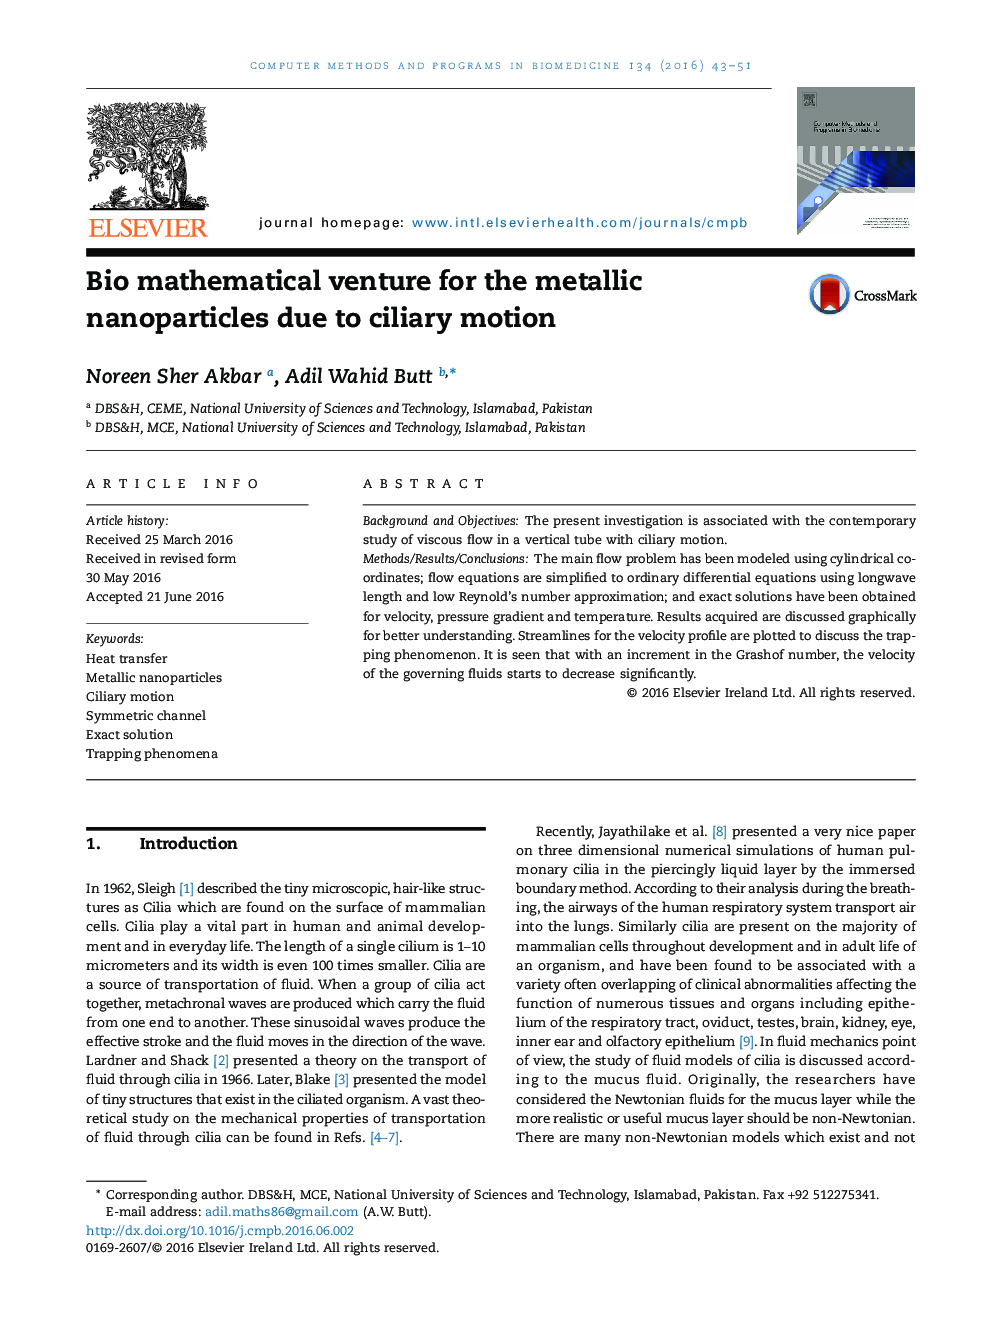 Bio mathematical venture for the metallic nanoparticles due to ciliary motion